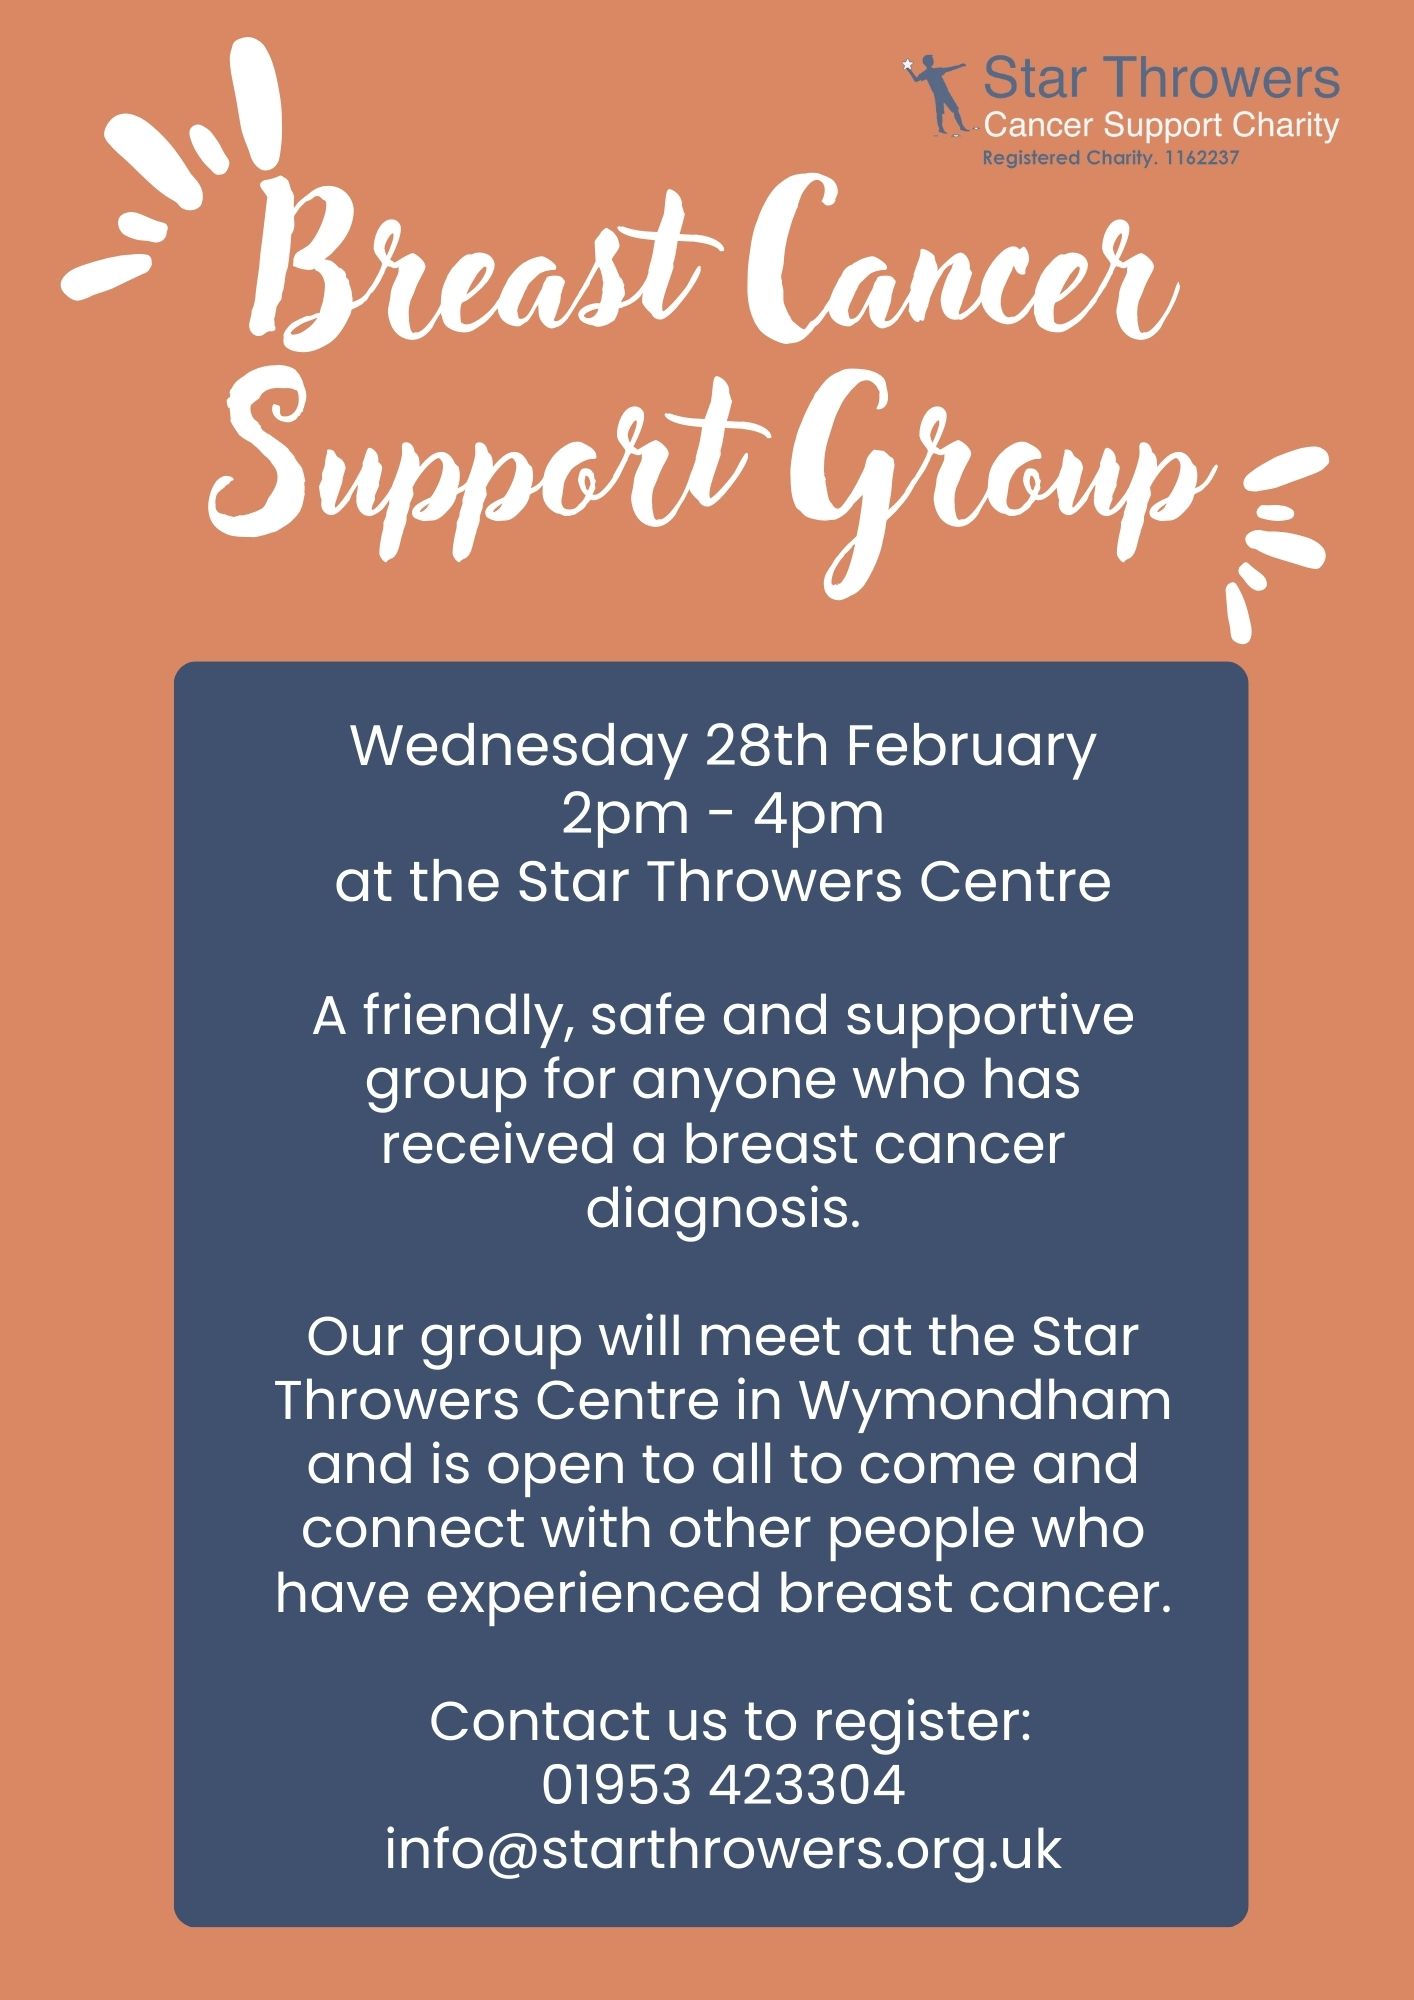 Breast Cancer Support Group – Star Throwers, Wymondham, 28th February